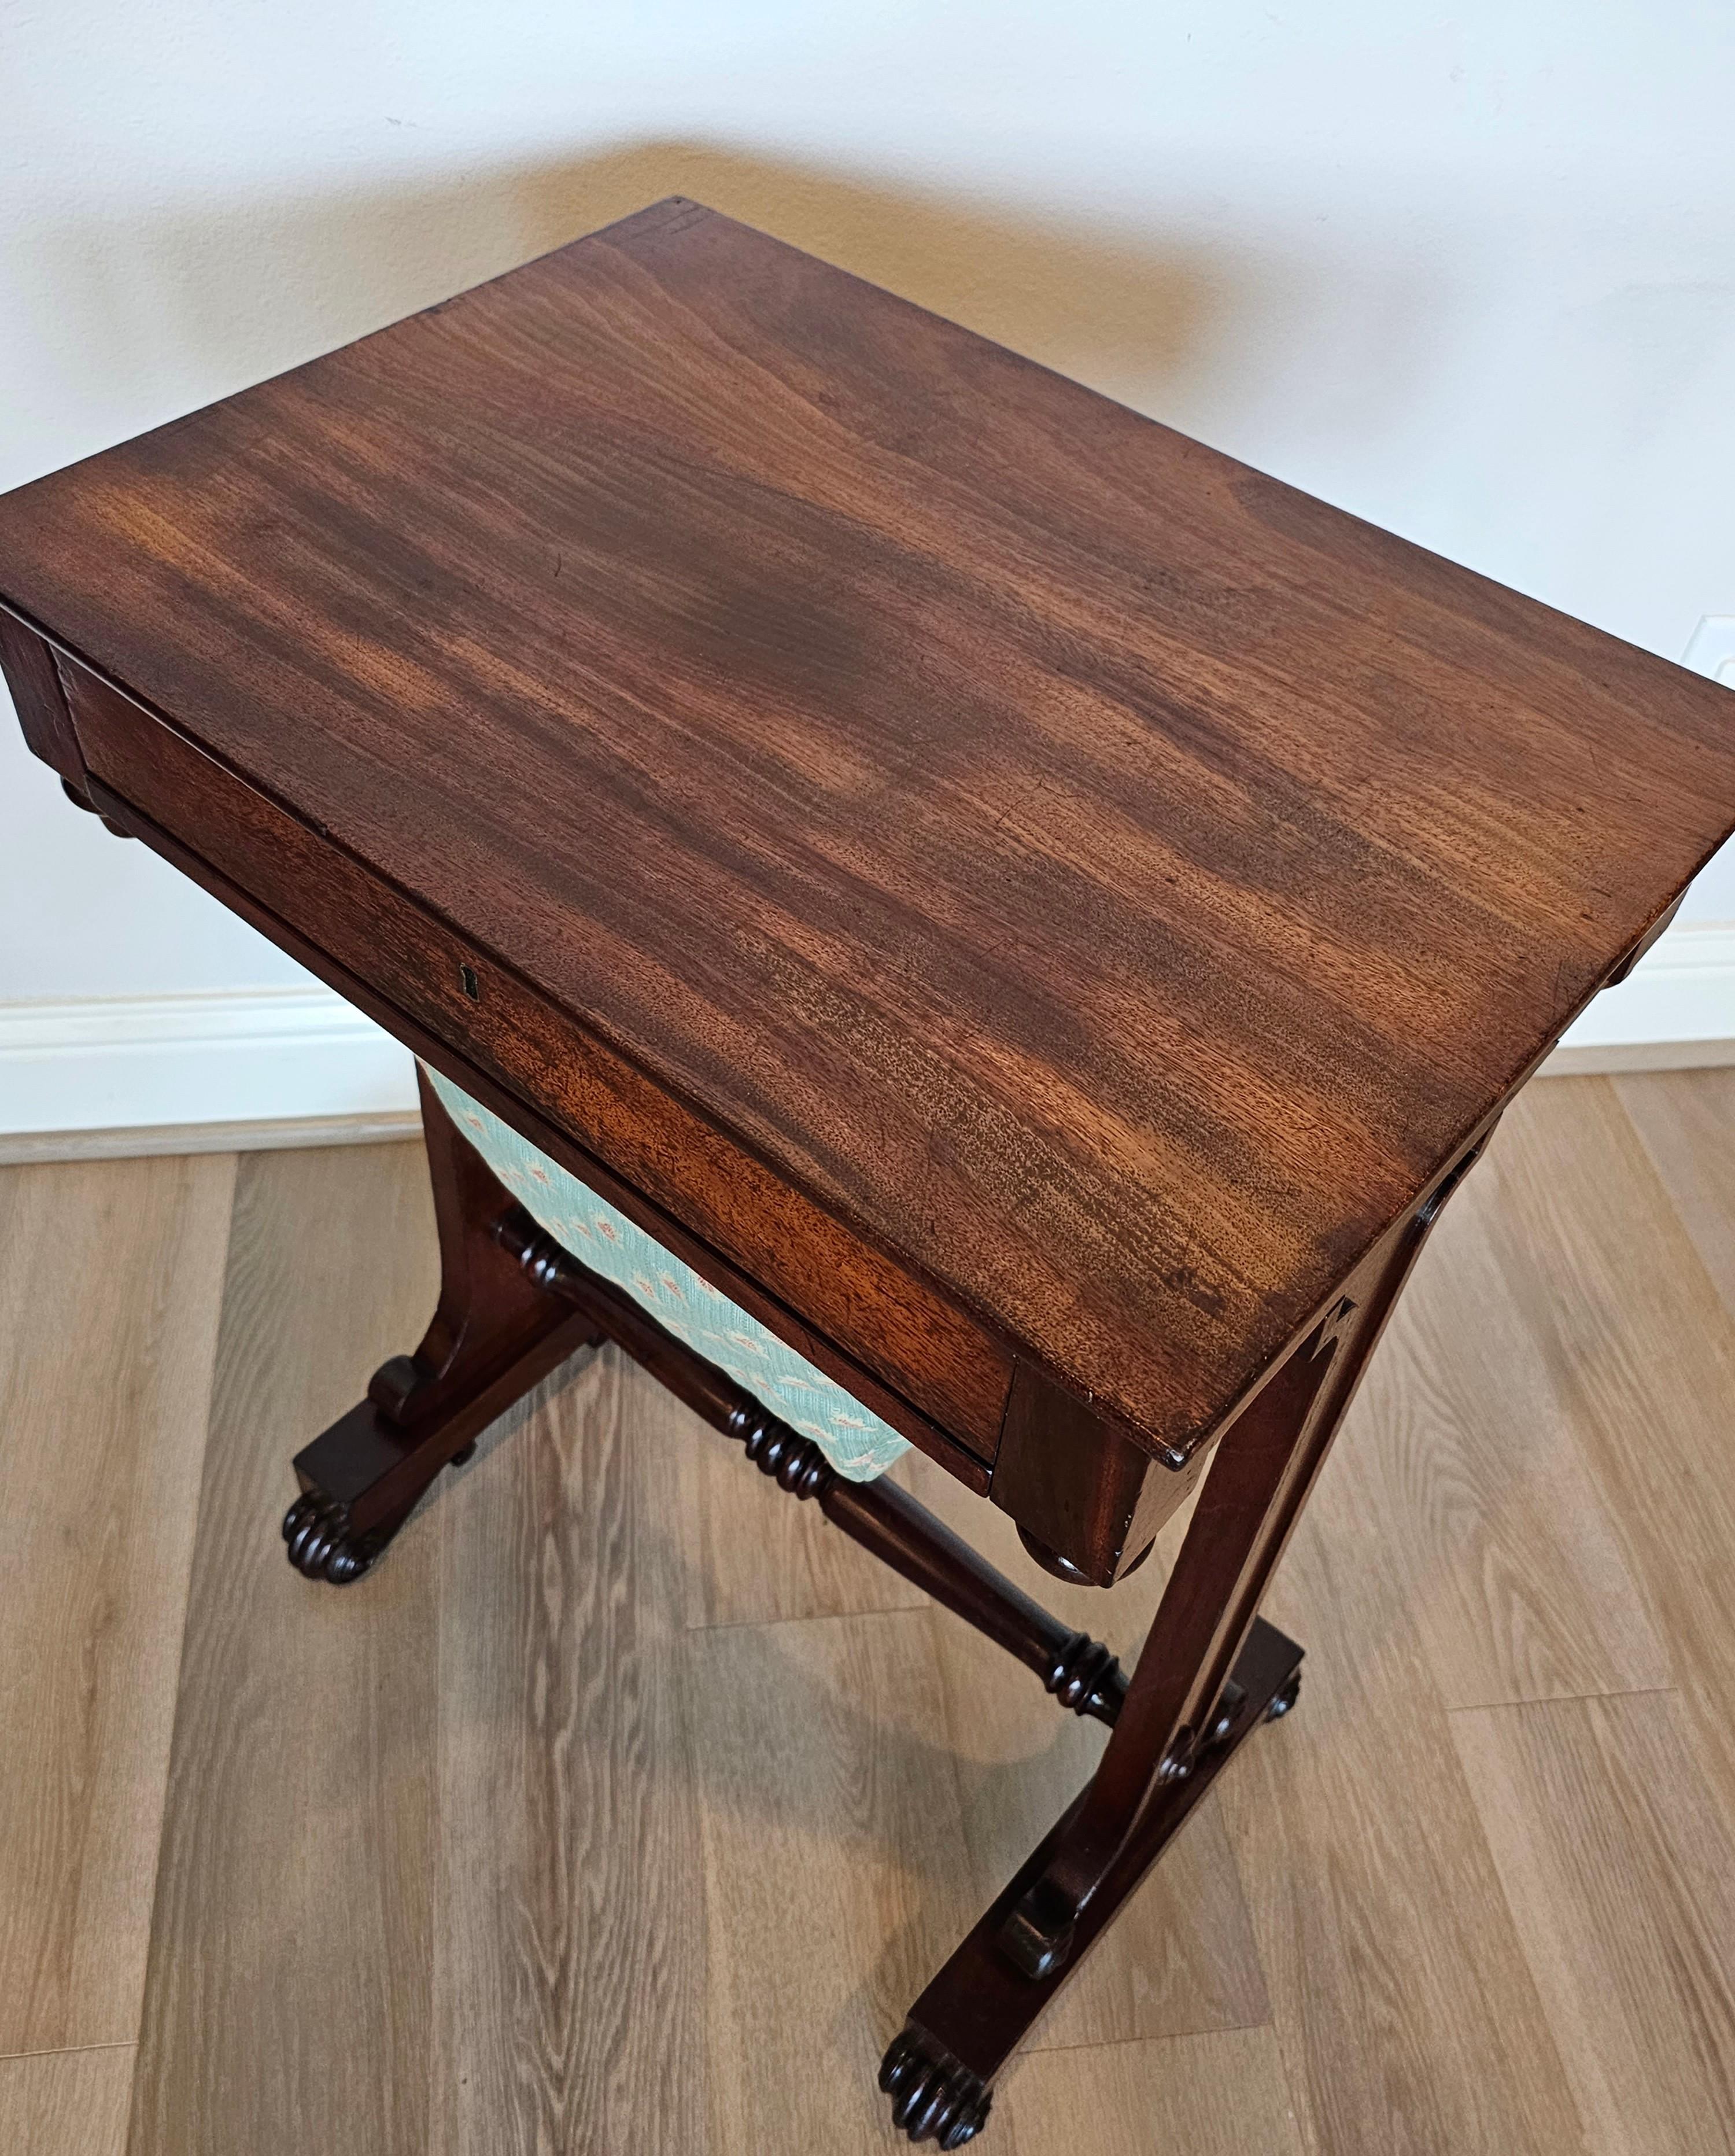 Hand-Crafted William IV Period English Sewing Stand Work Table  For Sale